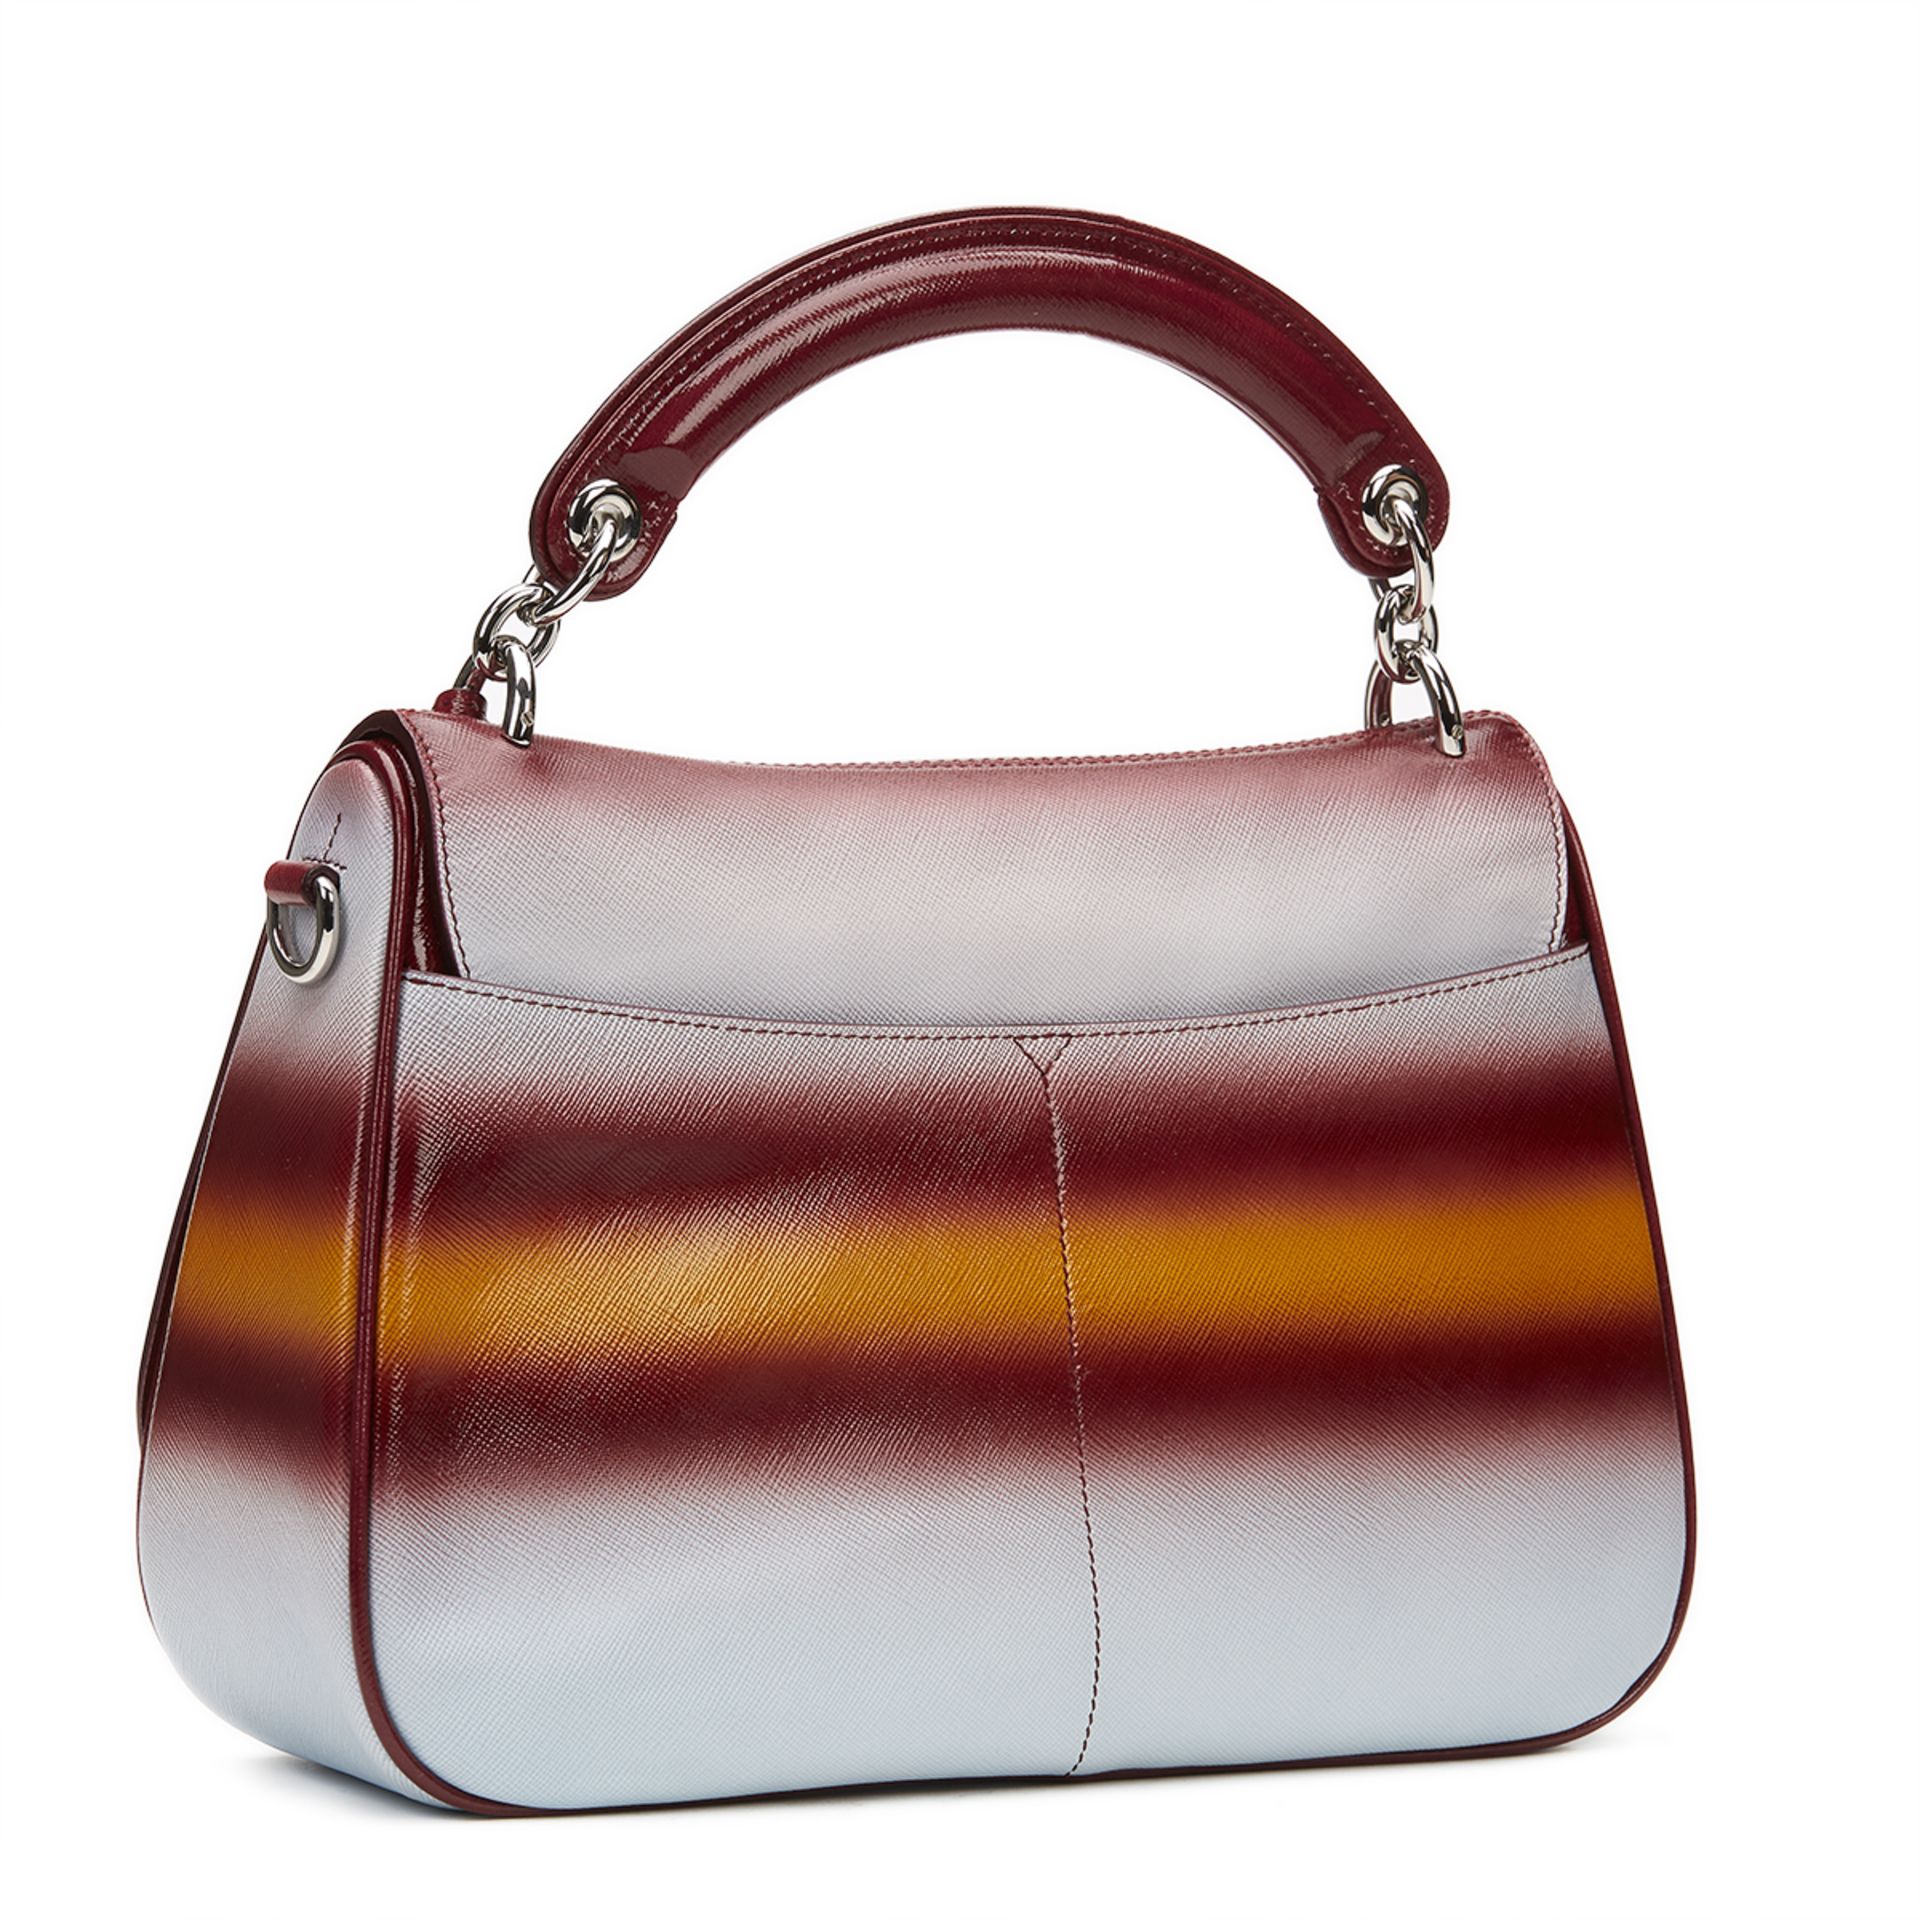 Christian Dior Maroon, Mustard & Blue Gradient Patent Leather Dune Bag - Image 4 of 11